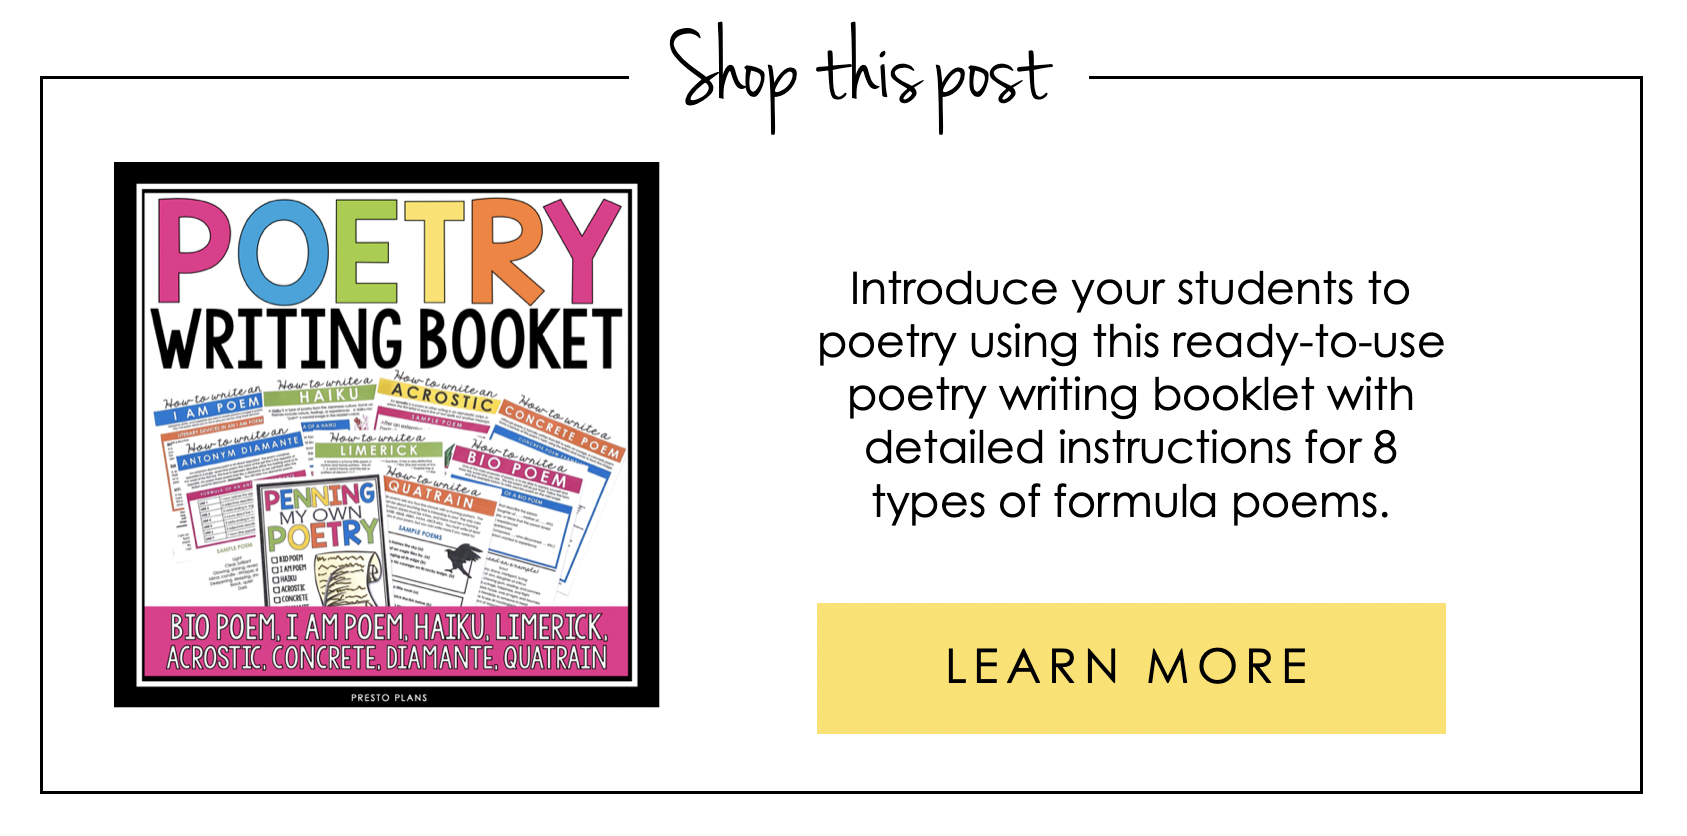 Poetry Writing Booklet Shop This Post